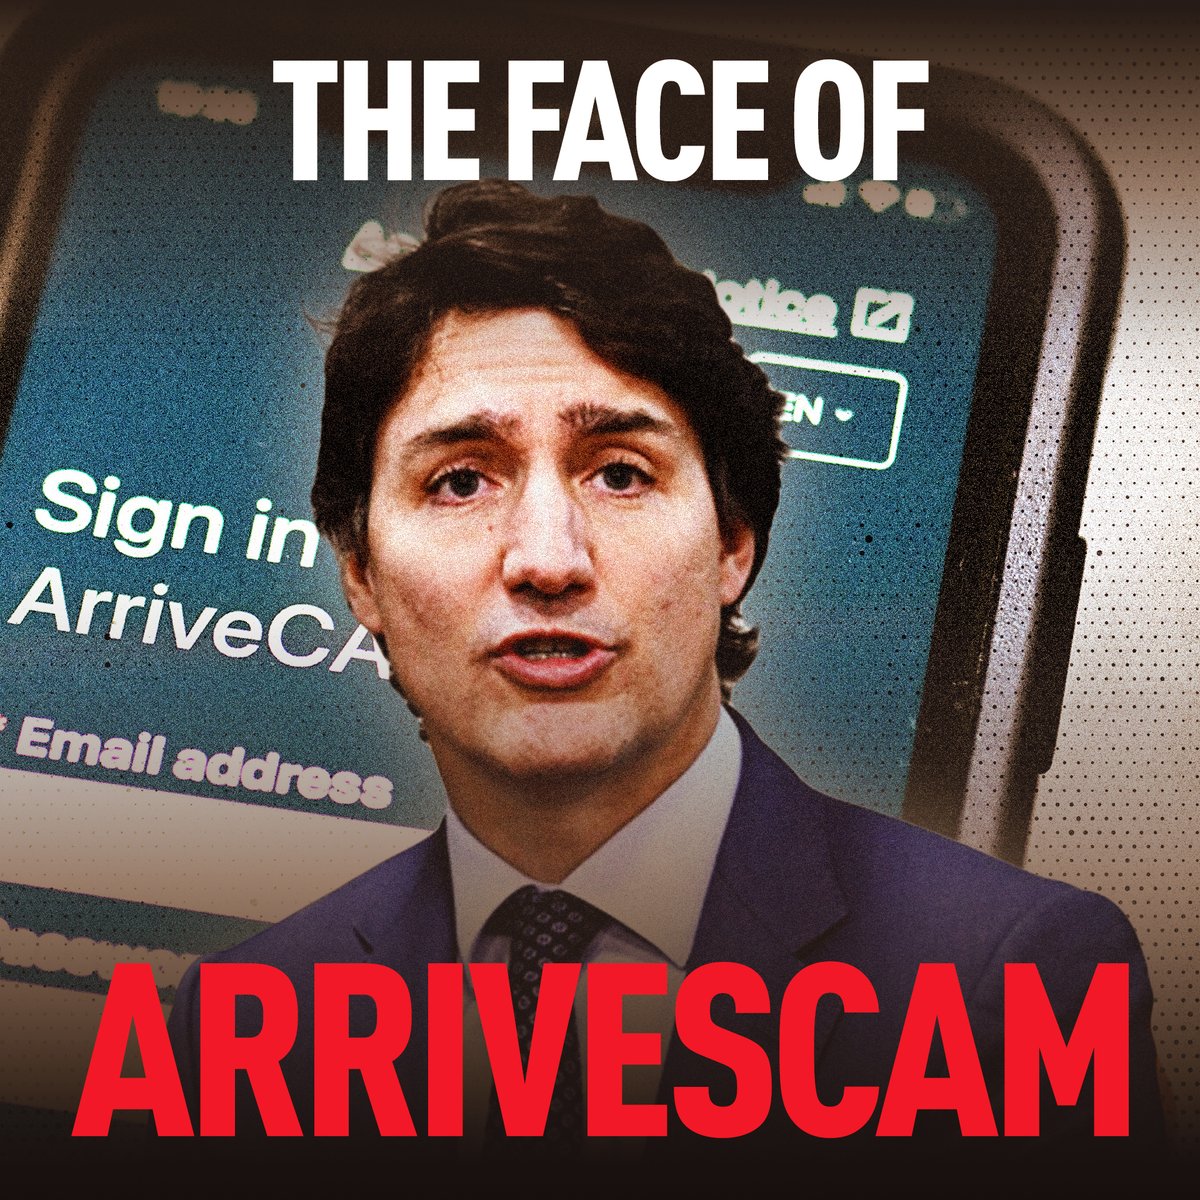 The Trudeau Way: no results, no accountability, and millions of taxpayer dollars wasted. Sign to investigate the #ArriveScam boondoggle: conservative.ca/cpc/investigat…